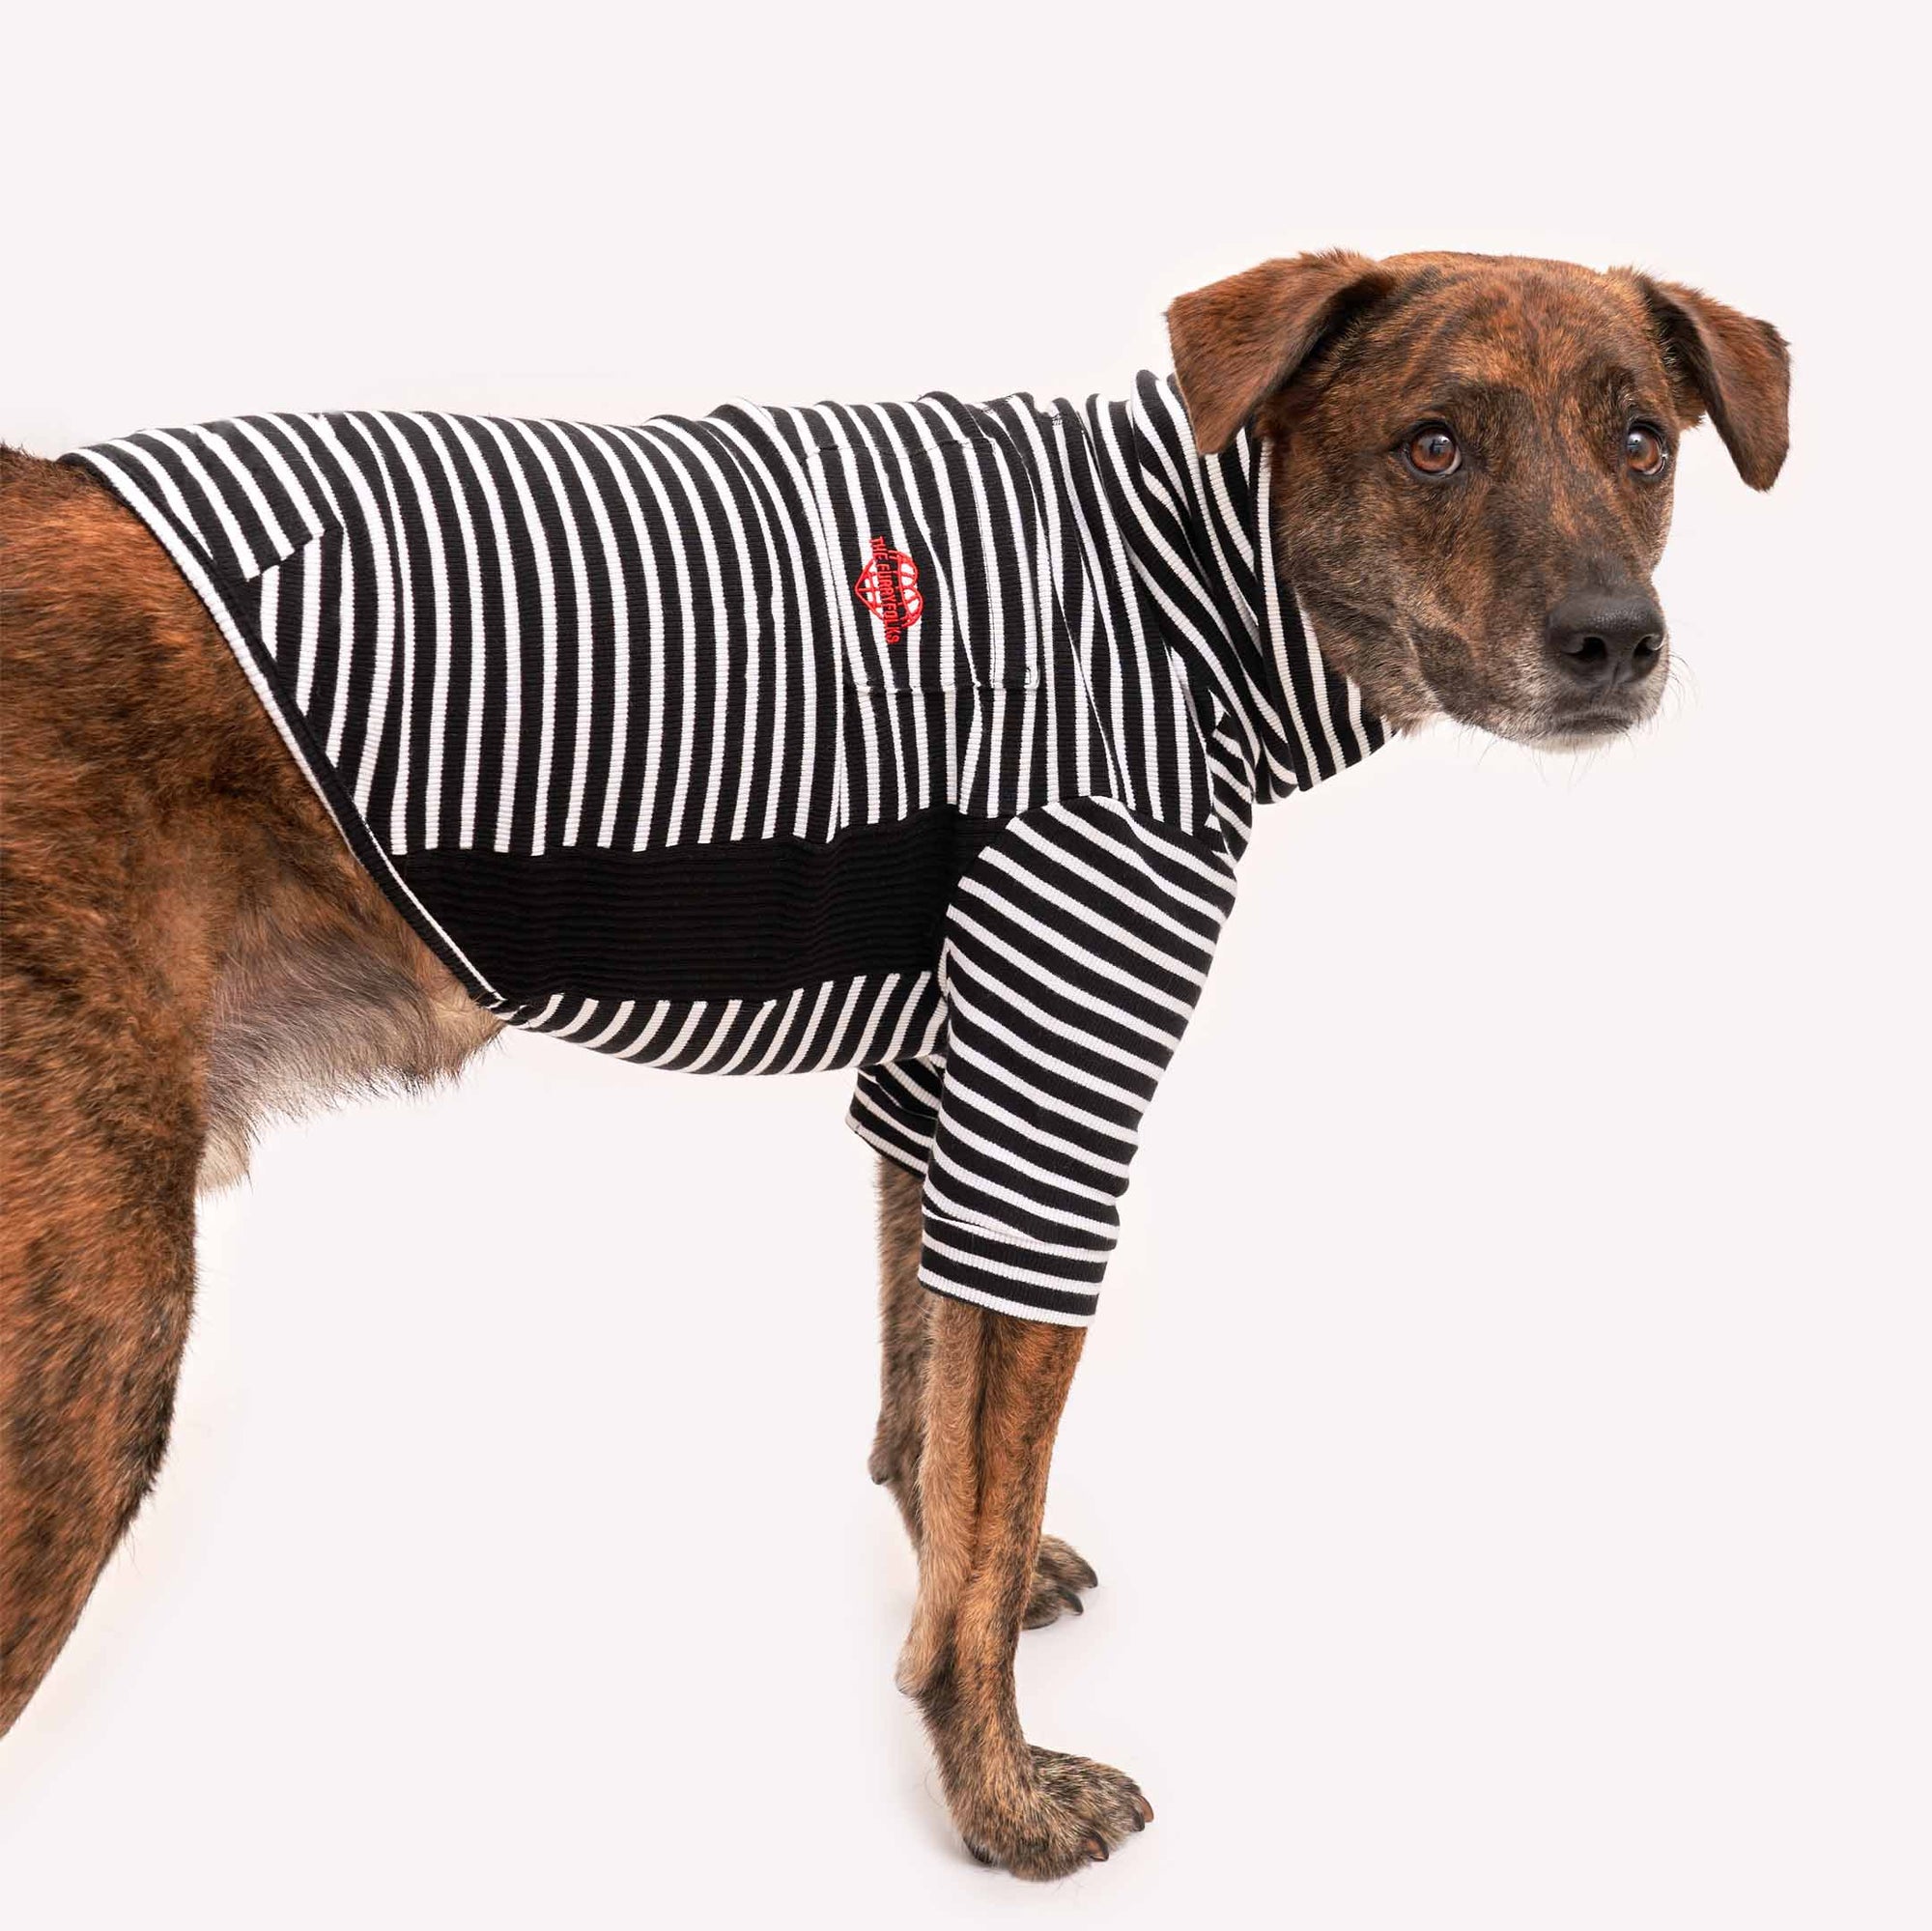 Brindle dog posing in a black and white striped shirt with red heart detail, perfect for stylish pets